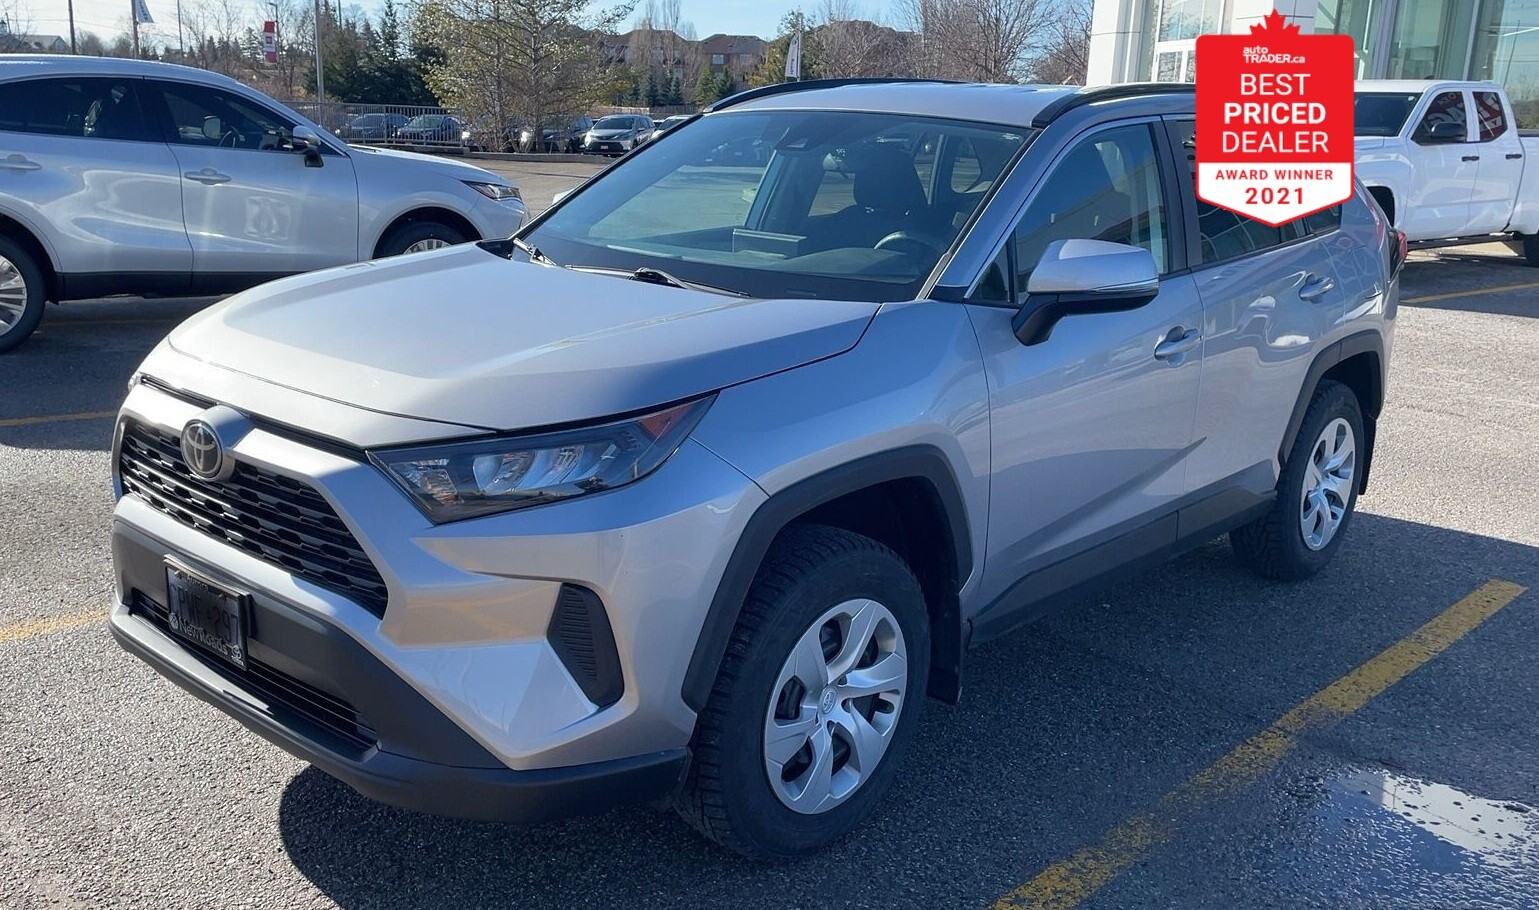 2020 Toyota RAV4 LE AWD, Locally Owned, Clean Car fax Accident Free